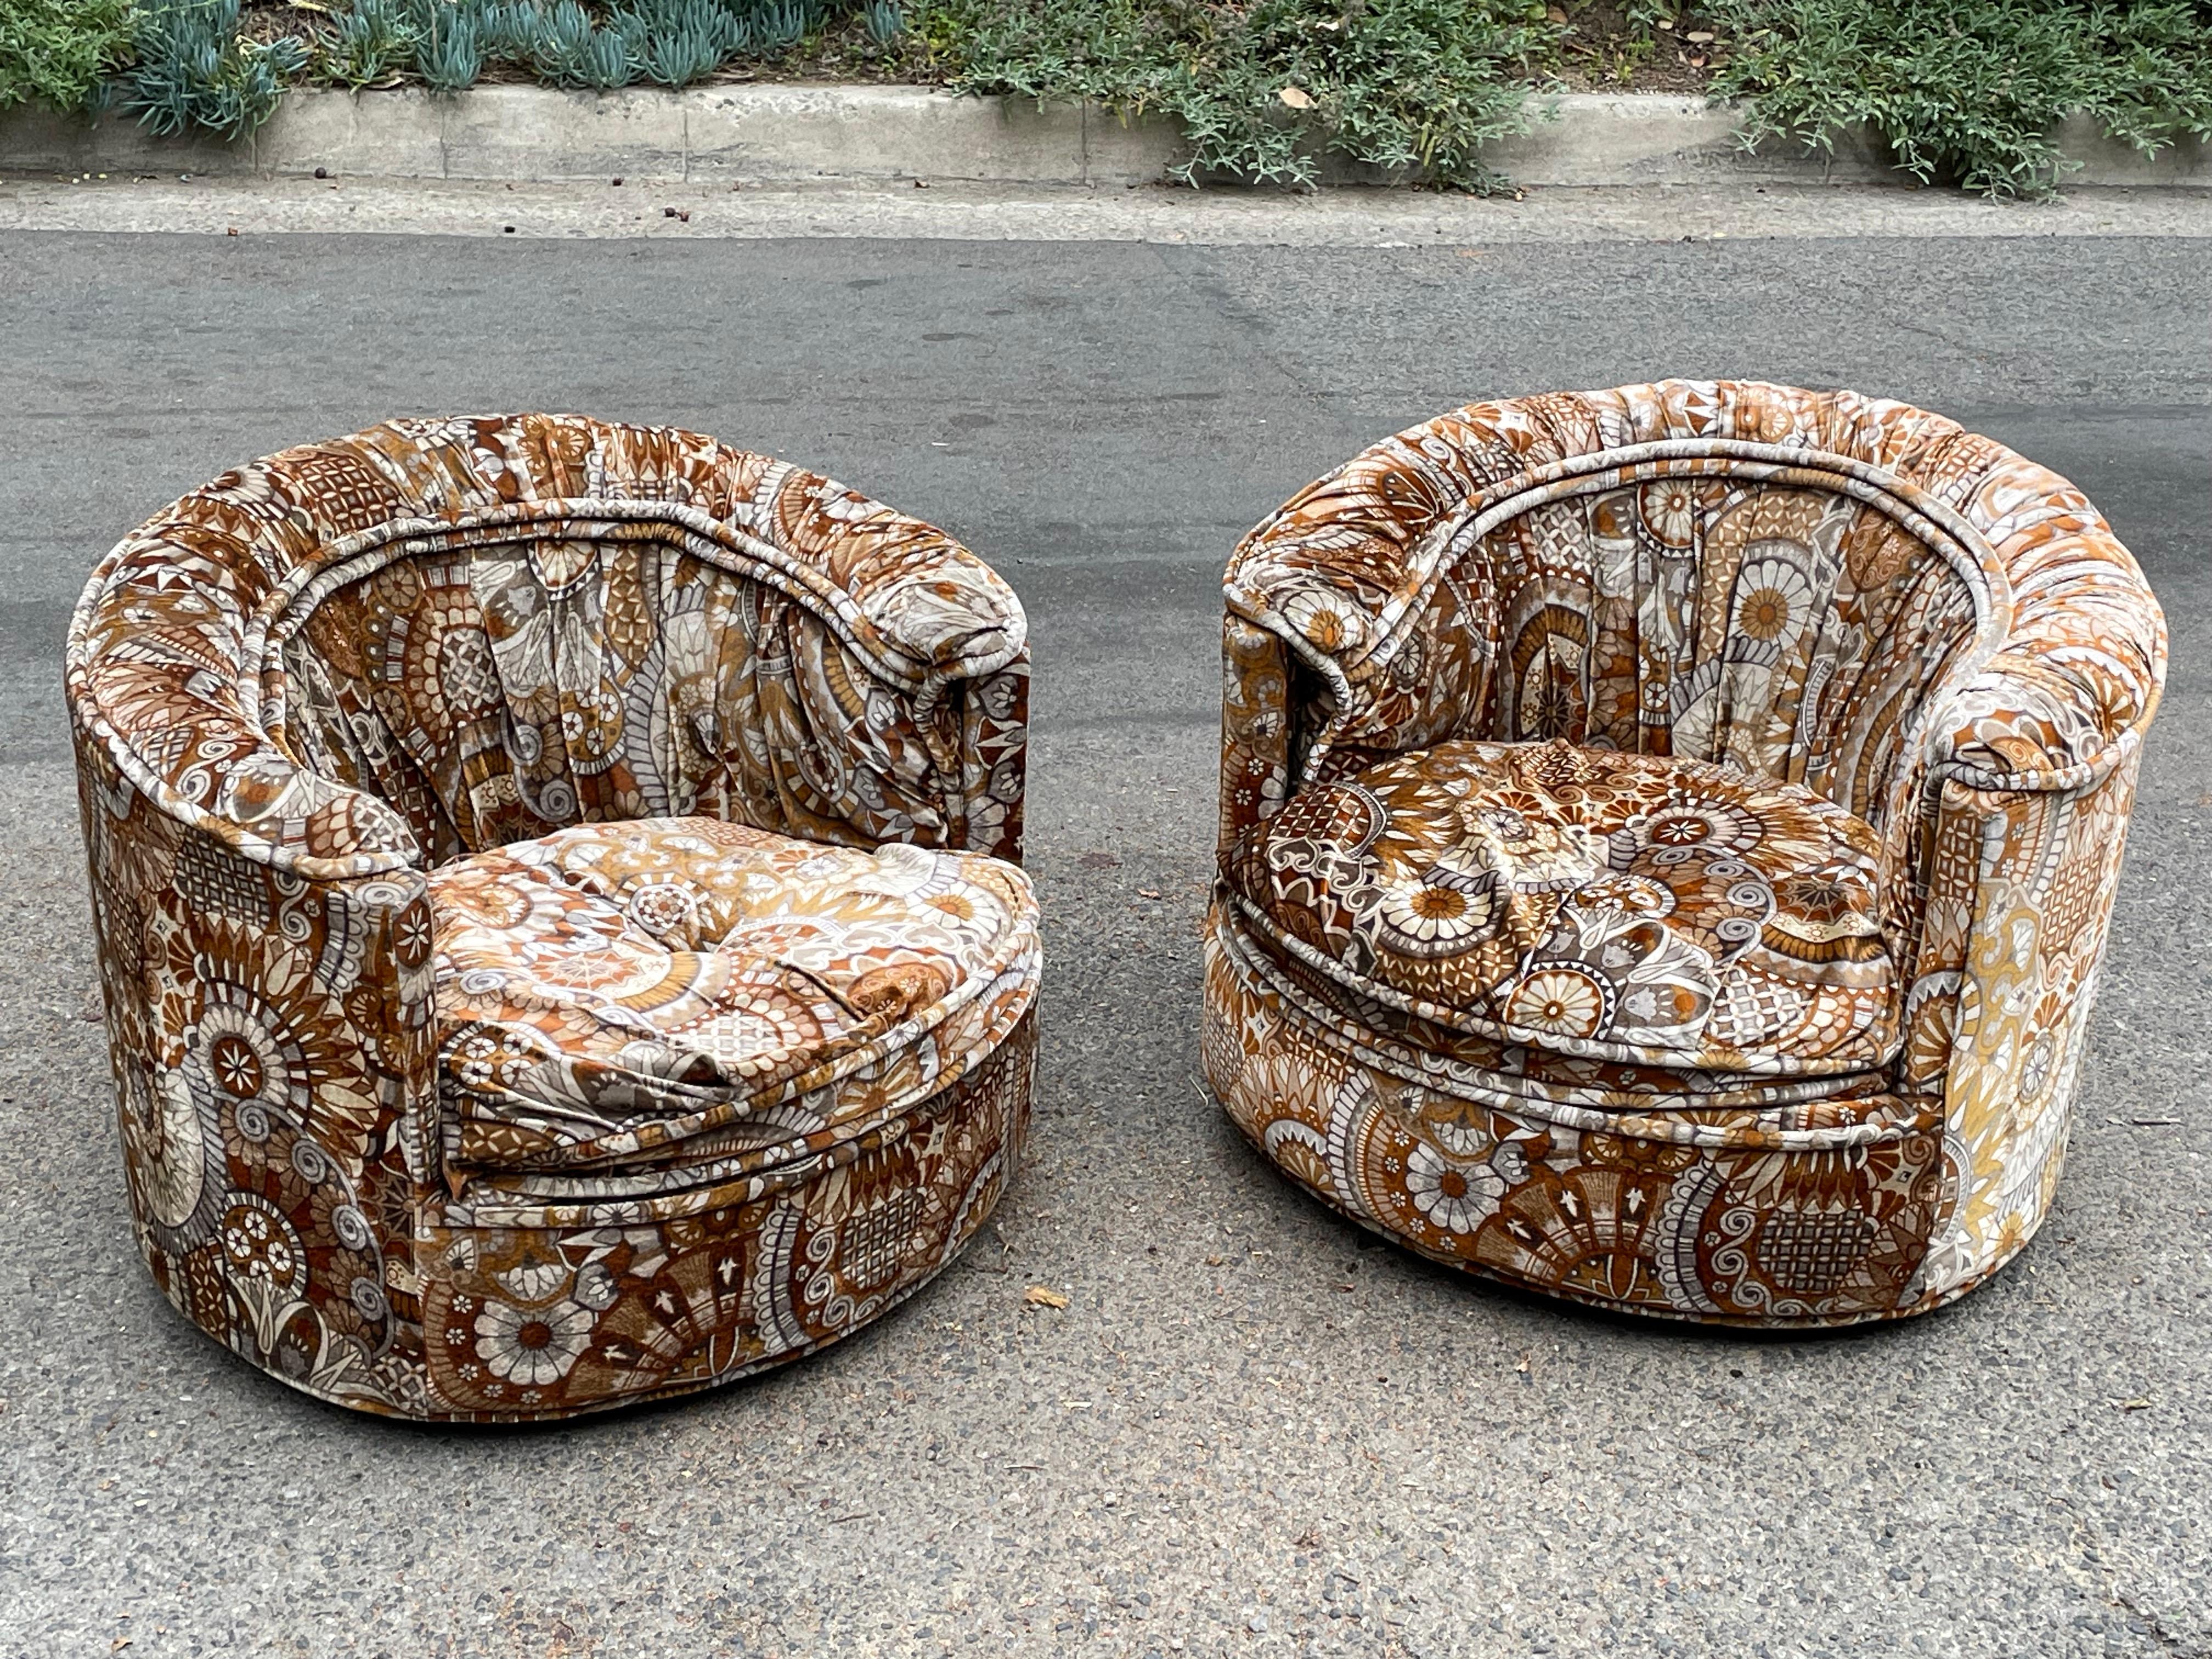 Pair of gorgeous vintage 1960s velvet swivel chairs attributed to Milo Baughman. Original velvet fabric. Very Jack Lenor Larsen feel.

These chairs are the sixties incarnate. Great design. We're currently pairing these chairs with a Massimo